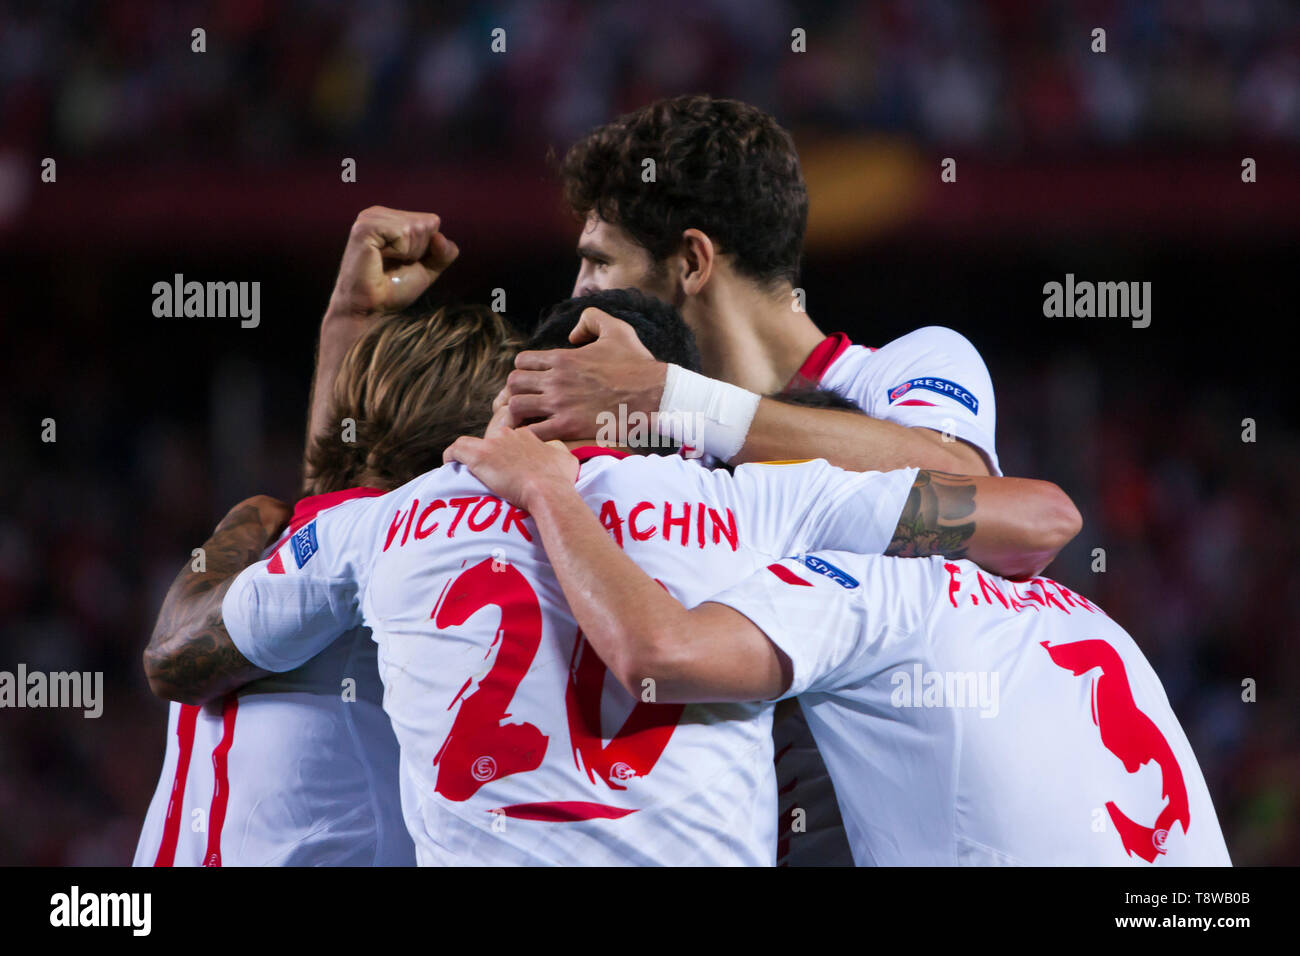 Players of Sevilla F.C. celebrate for 4-0 during the match of Europa League (quarterfinal 2nd leg) between Sevilla F.C. and F.C. Porto at the Ramon Sanchez Pizjuan Stadium on April 10, 2014 in Seville, Spain Stock Photo